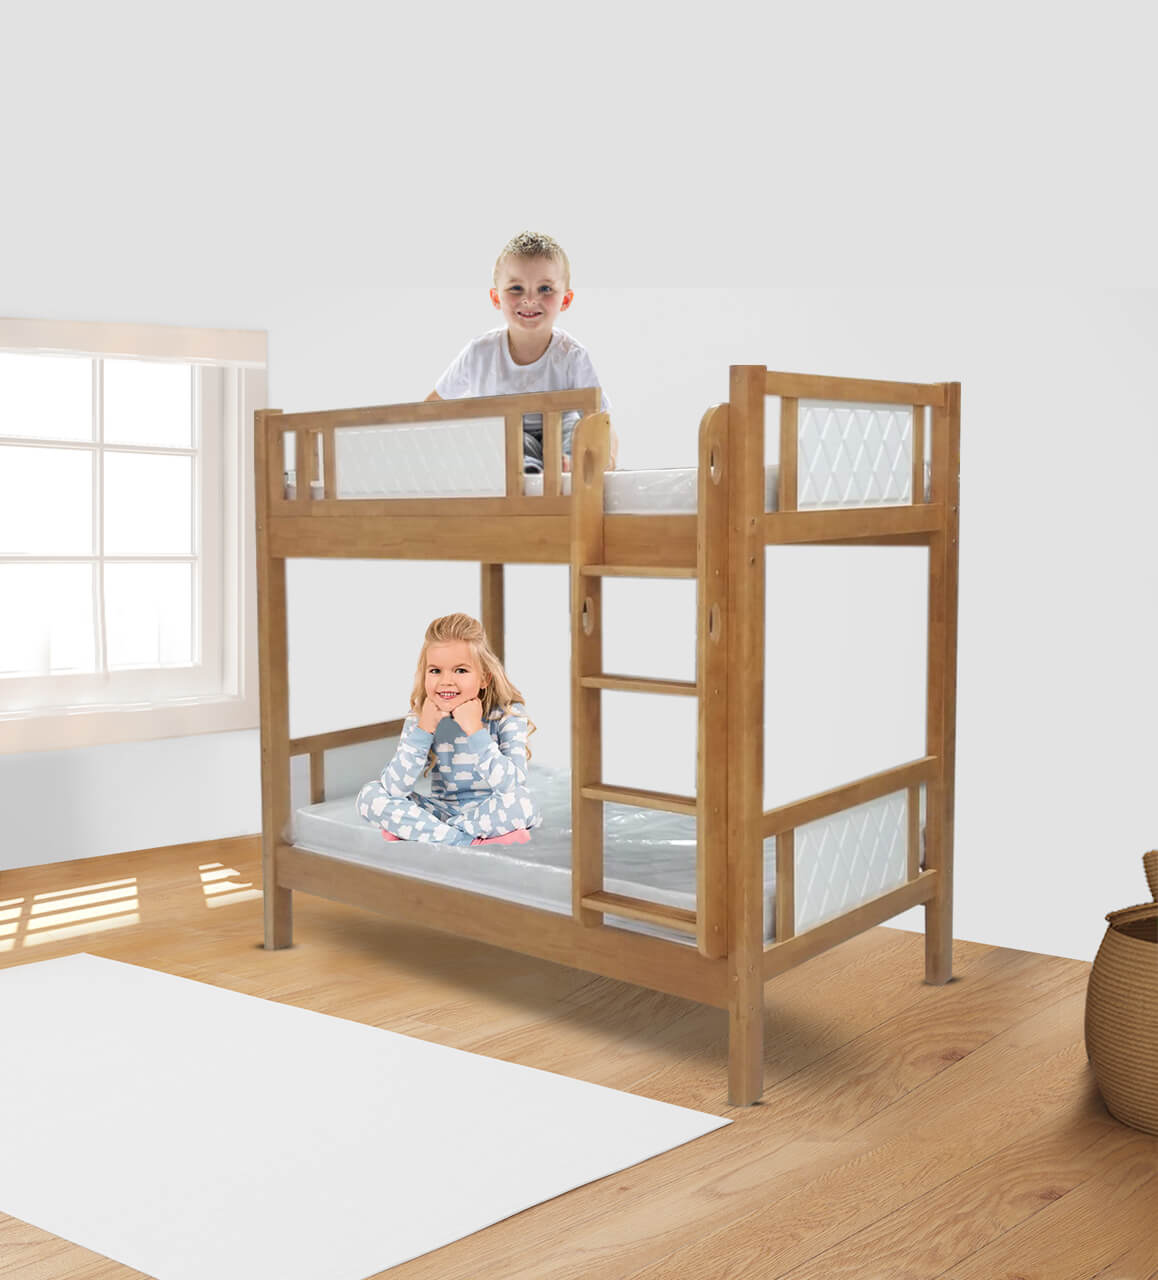 Meagstar Wooden Finish oak Bunk bed for kids With Ladder-Brown